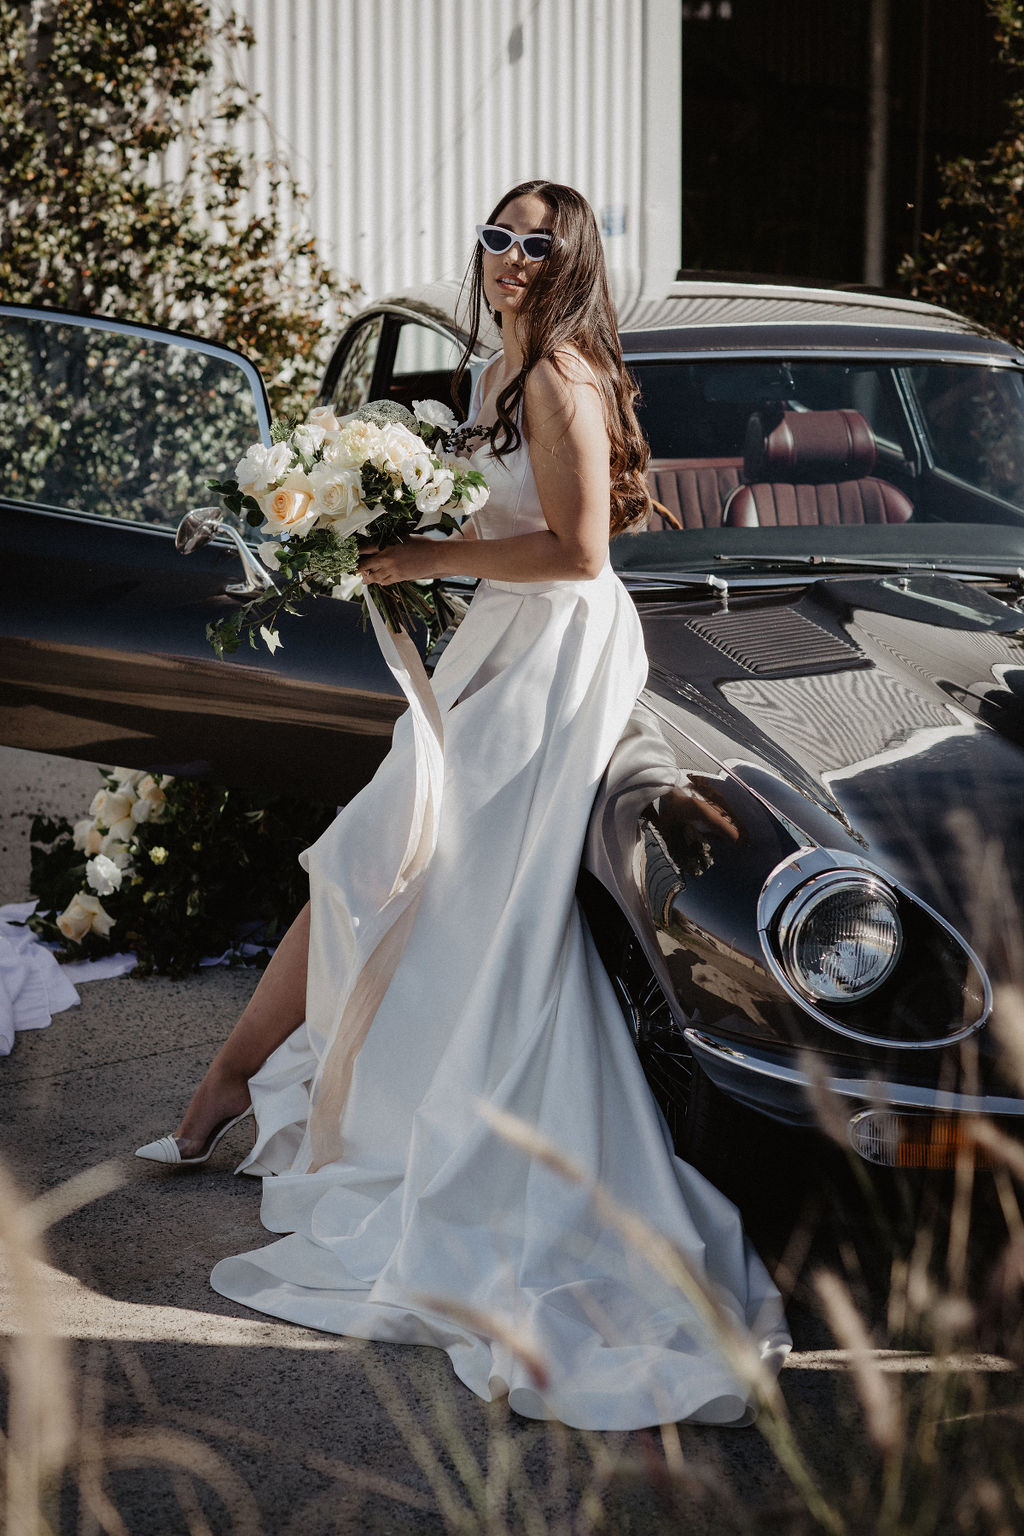 mt weddings perth photography florals bridal gown styled shoot